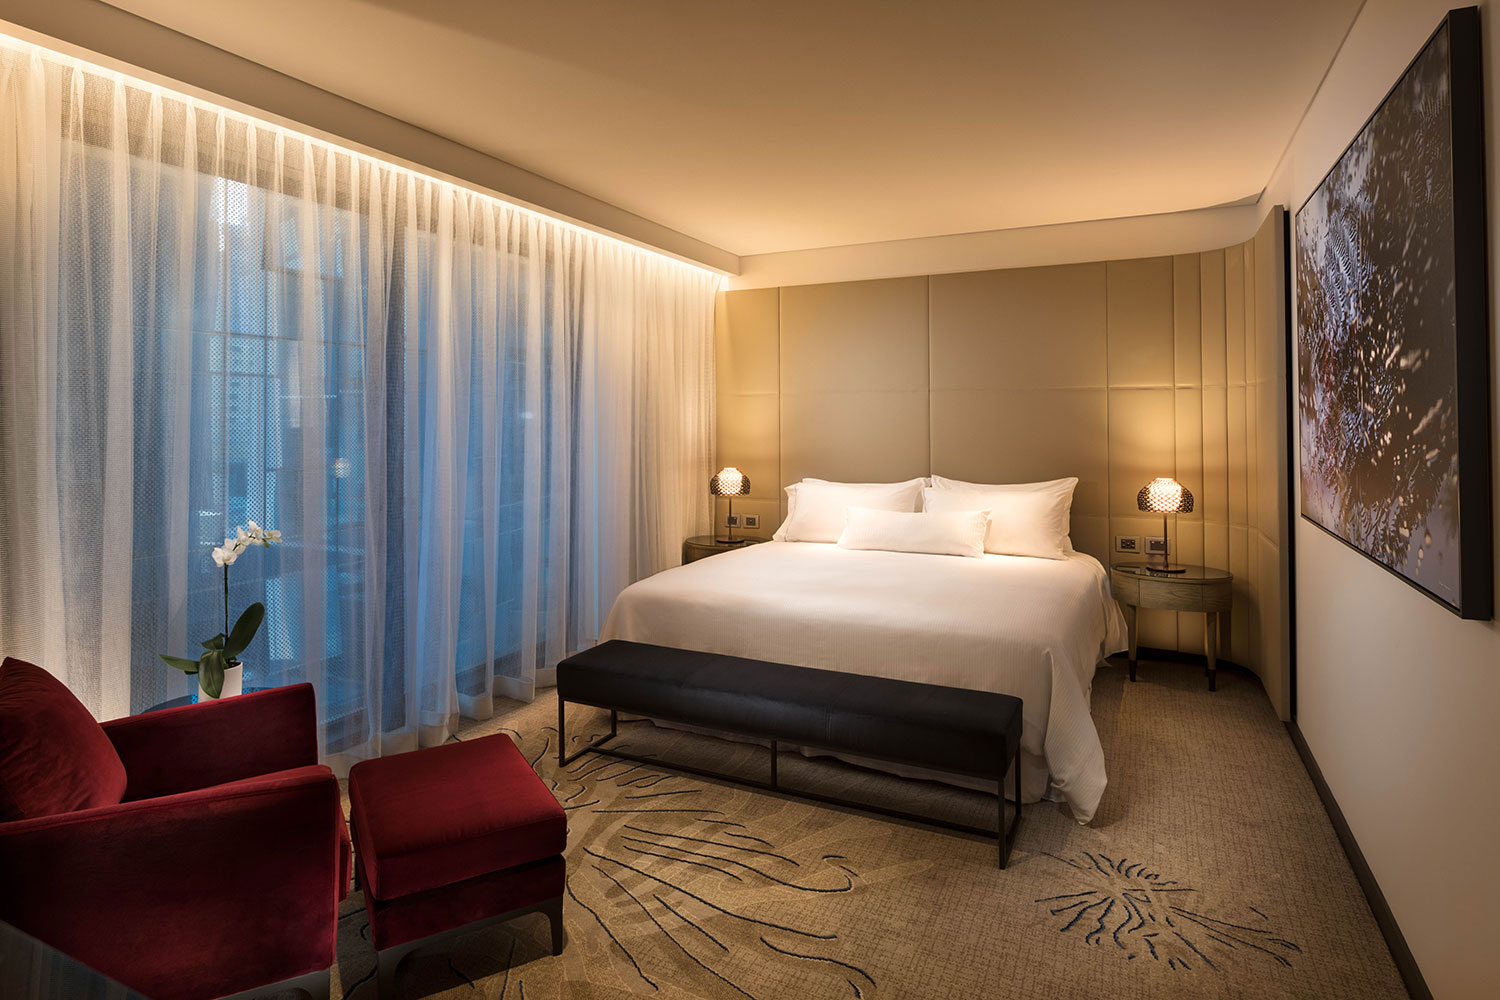 Plush interiors featuring King size beds and red velvet chairs adorn Weston's superb suites